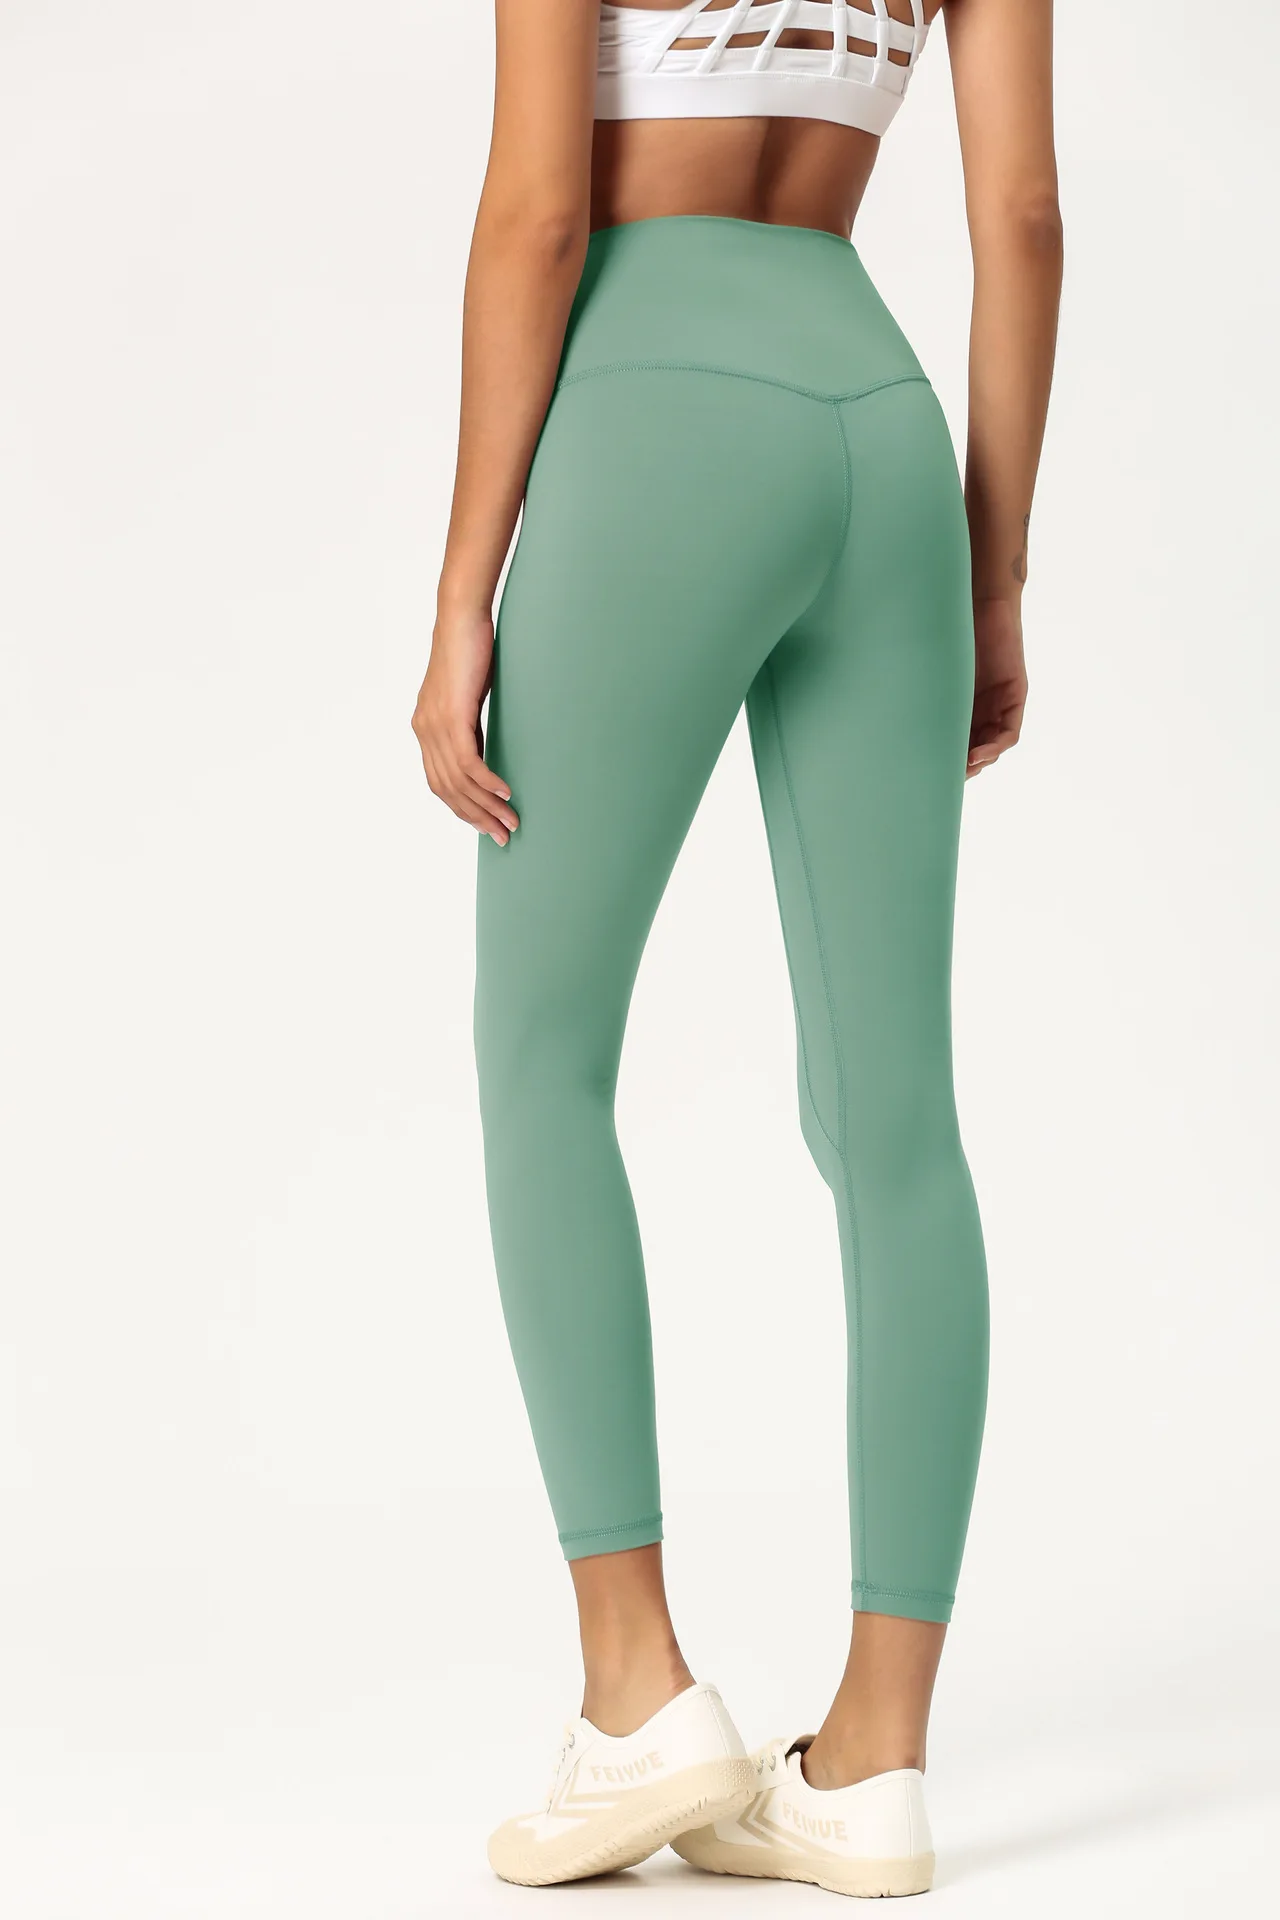 Jockey Leggings For Ladies Online Indiana  International Society of  Precision Agriculture